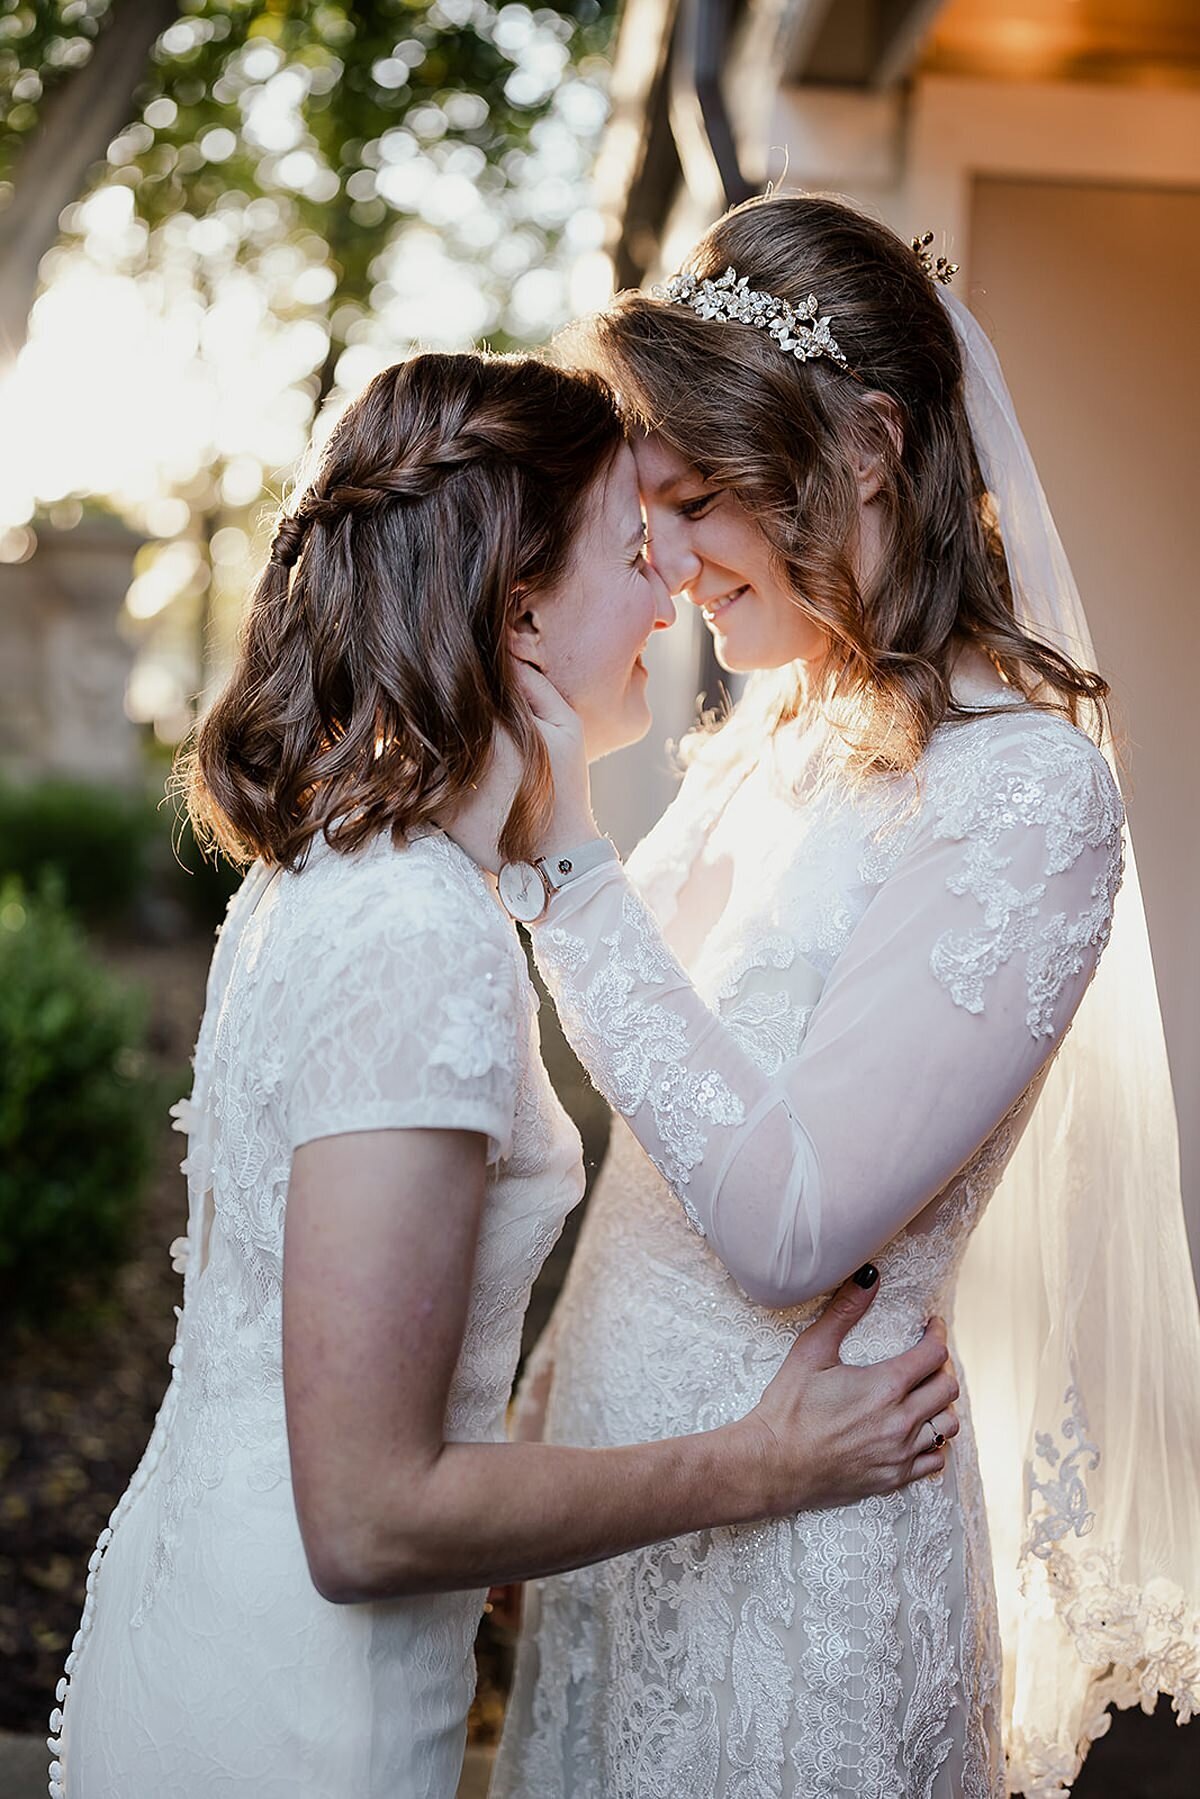 Tall bride wearing a white lace dress, veil and tiara kisses her wife, another bride wearing a short sleeved white lace wedding gown